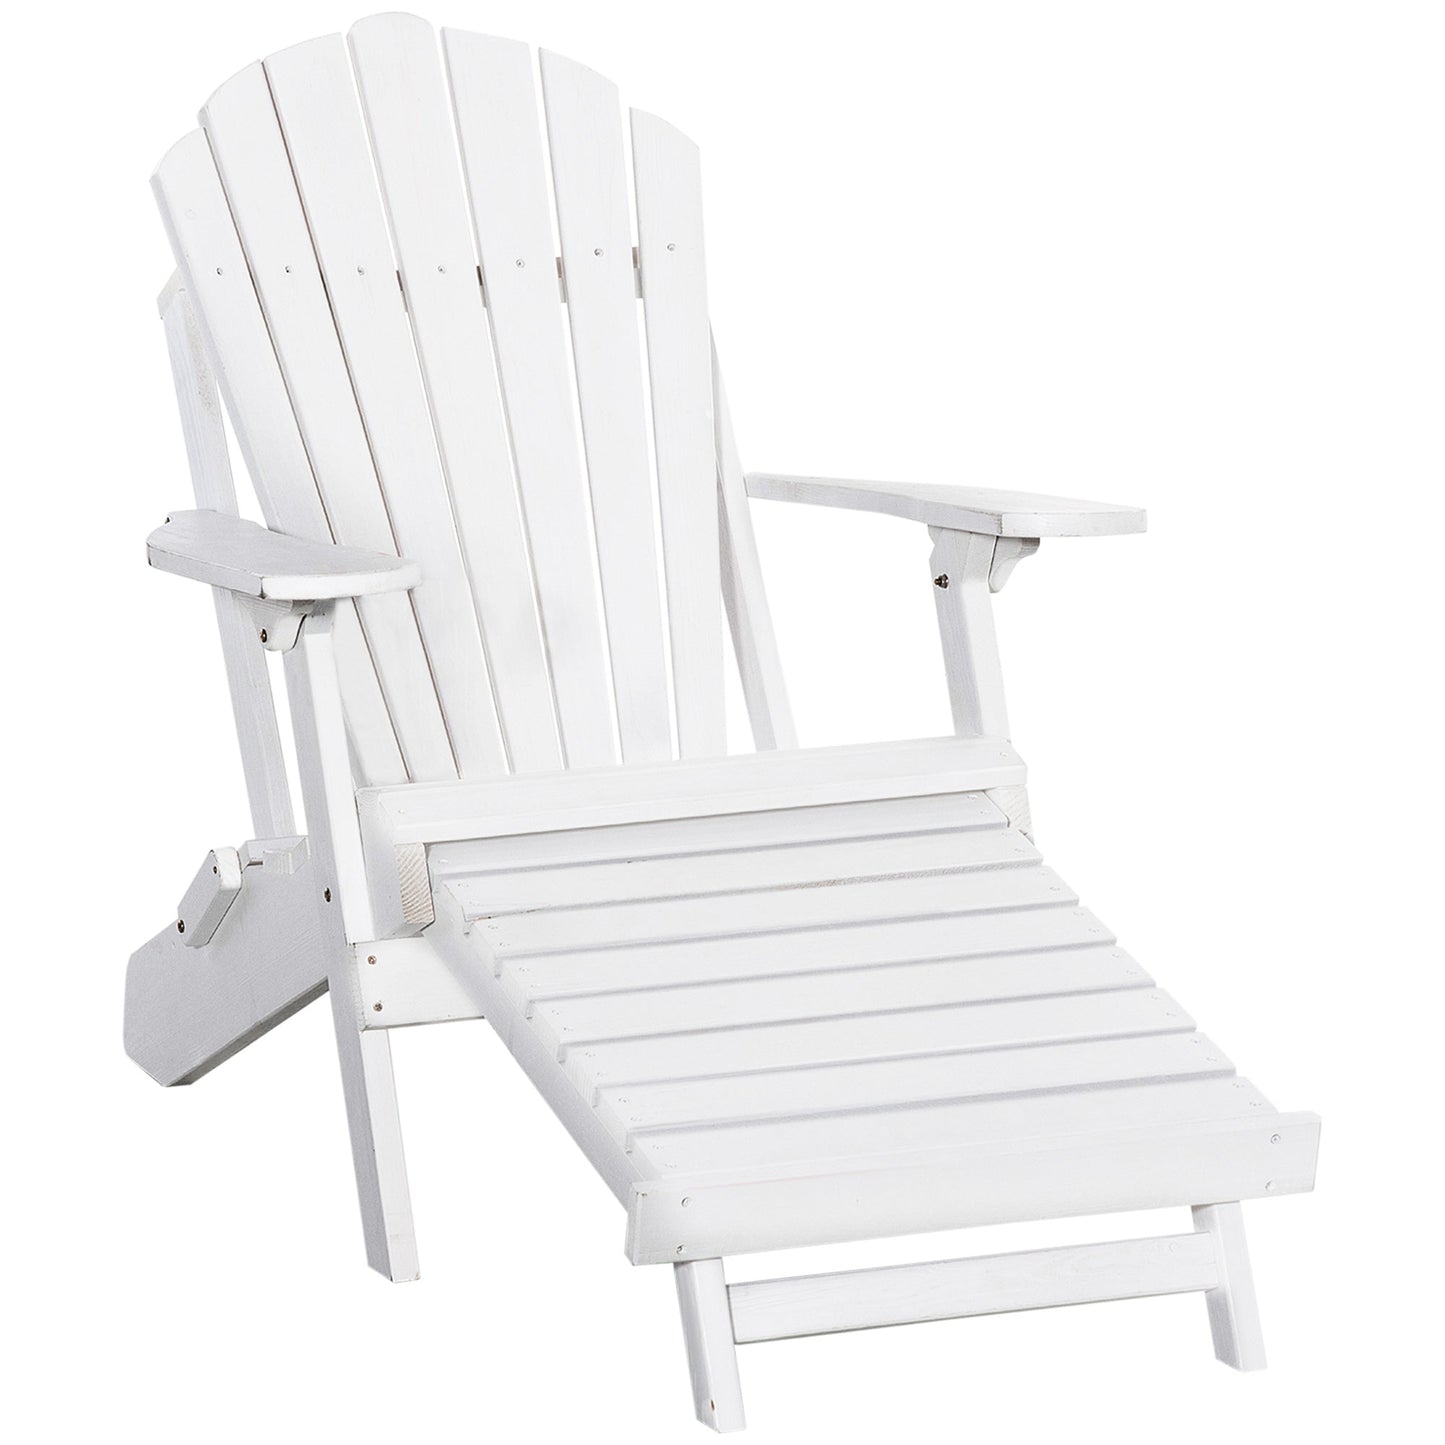 Outdoor and Garden-Folding Adirondack Chair with Ottoman, Outdoor Wooden Lounger for Patio, Porch, Poolside, Garden, White - Outdoor Style Company